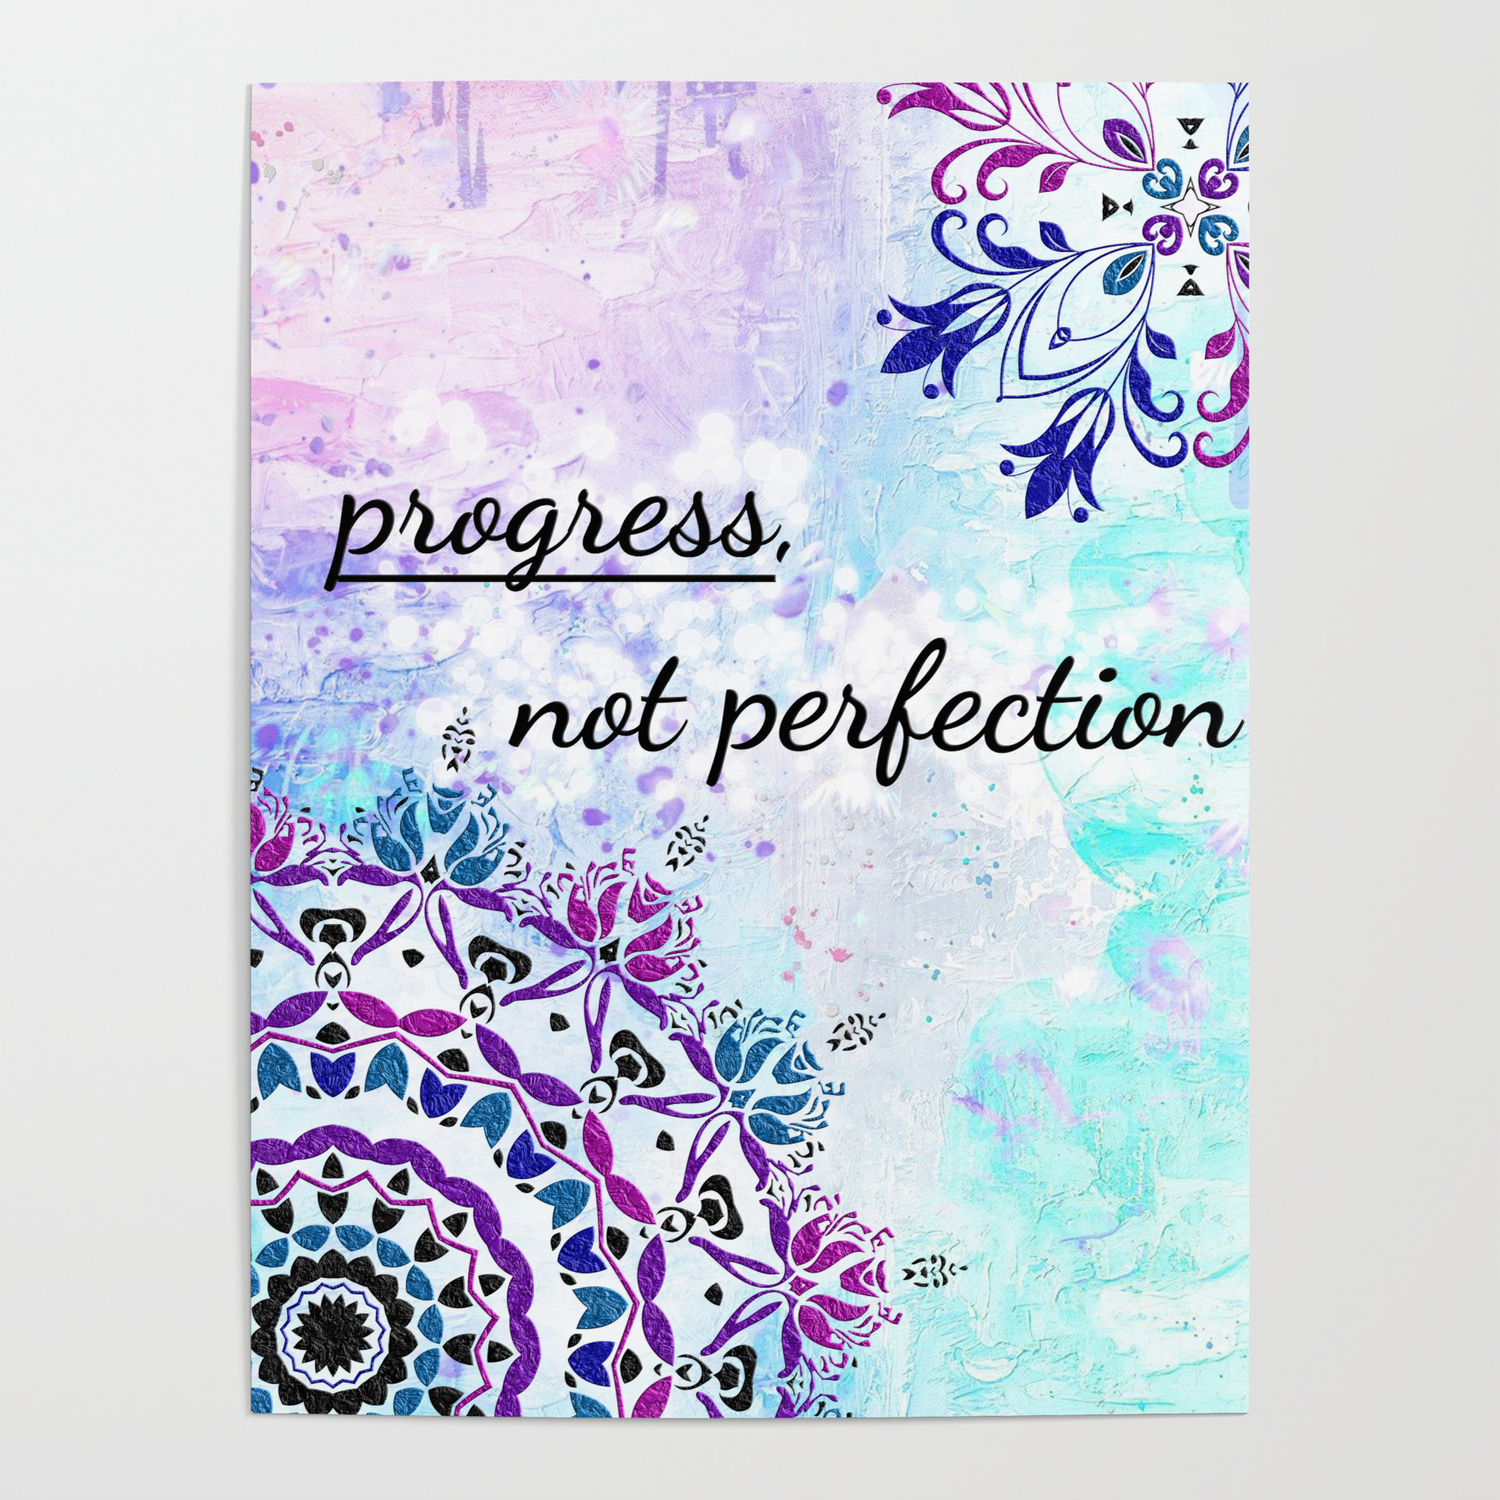 barricade Waarschijnlijk vallei Progress, not perfection! Inspirational quote and affirmation with mandala  frame Poster by Good Vibes _ Inspirational Quotes _ Mand | Society6